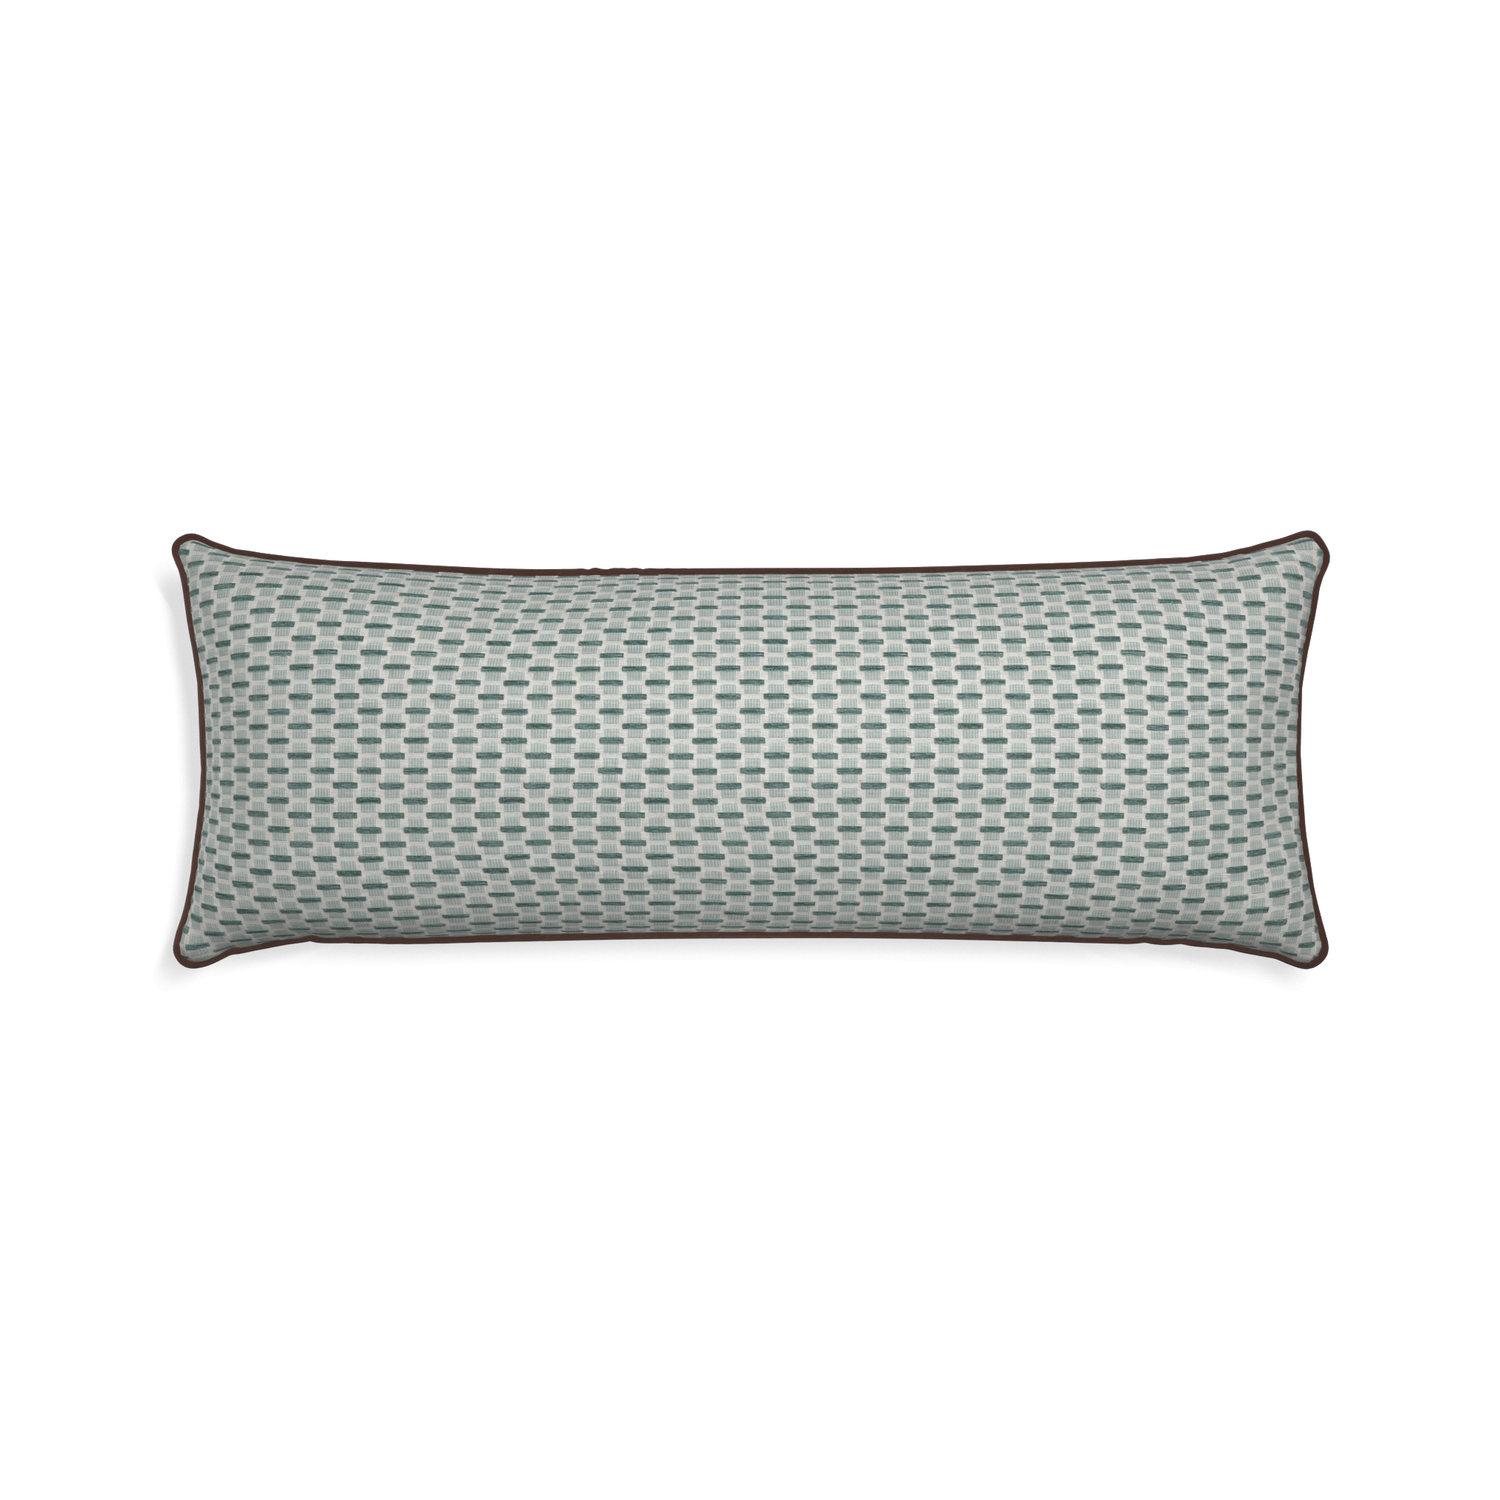 Xl-lumbar willow mint custom green geometric chenillepillow with w piping on white background